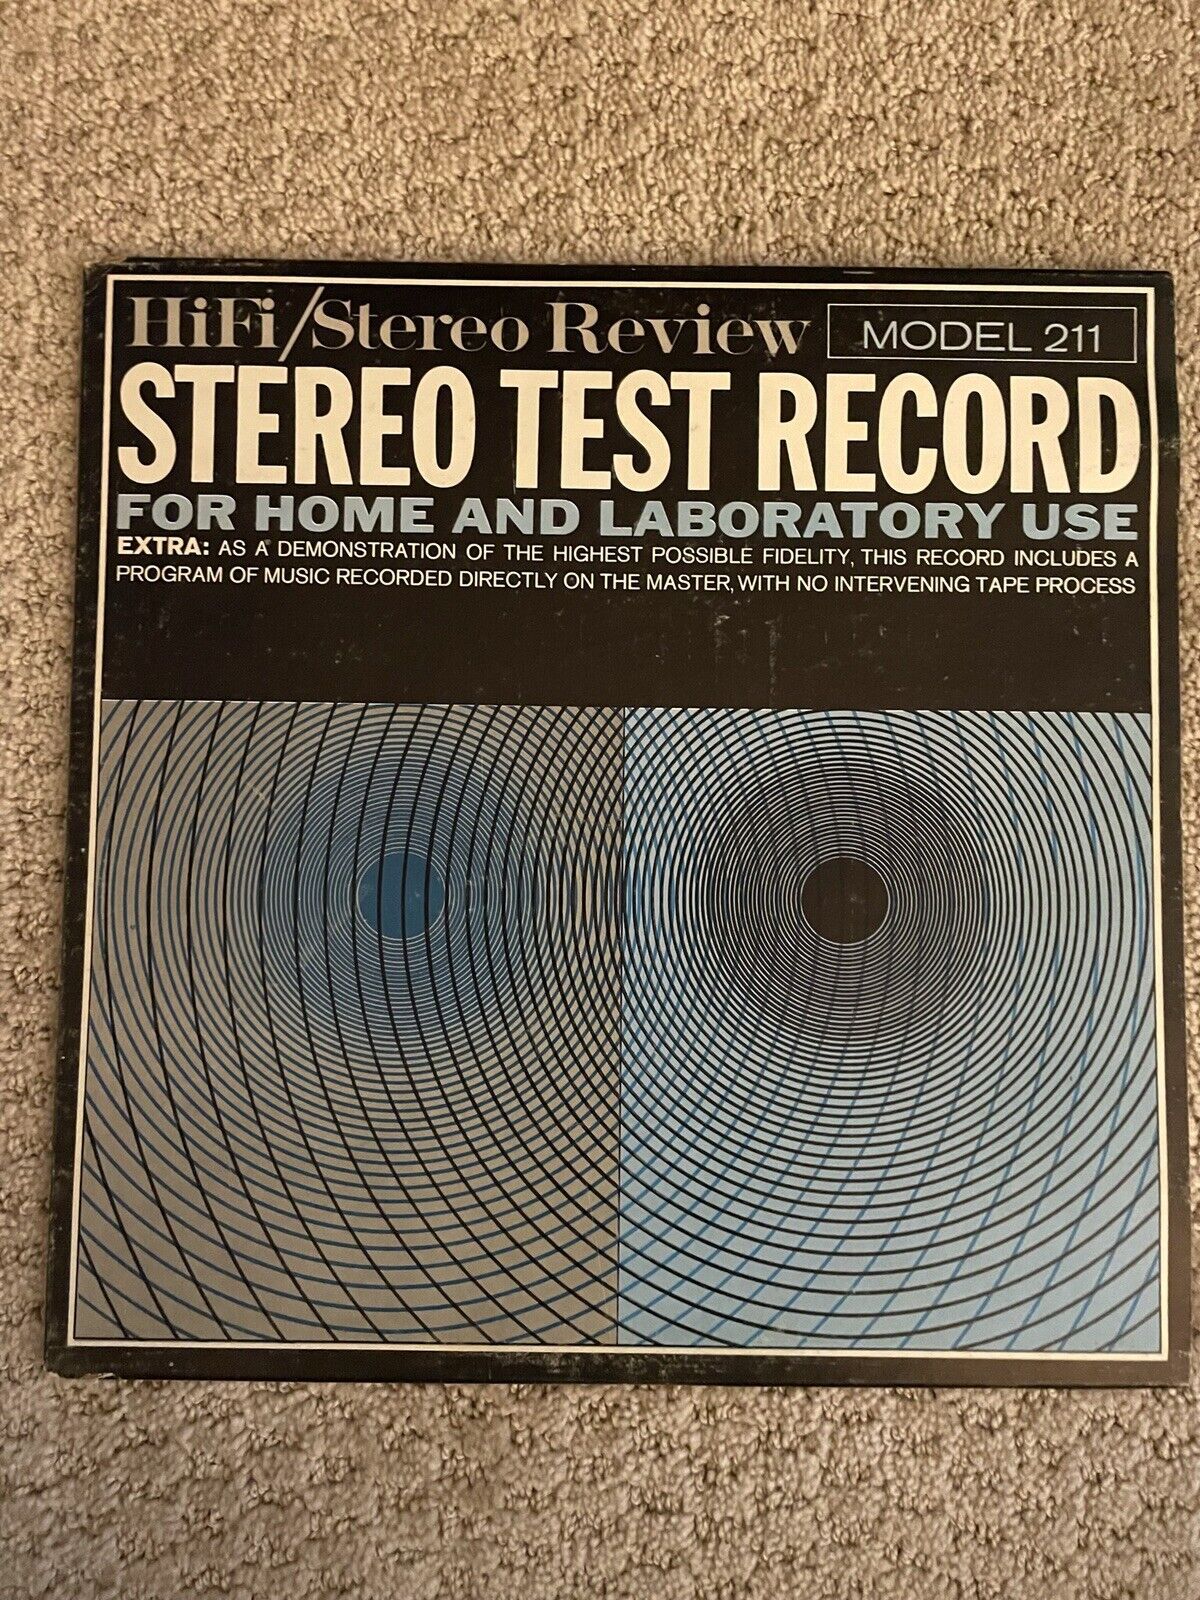 STEREO REVIEW 1963 LP Stereo Test Record for Home & Lab / Model 211 + Booklet